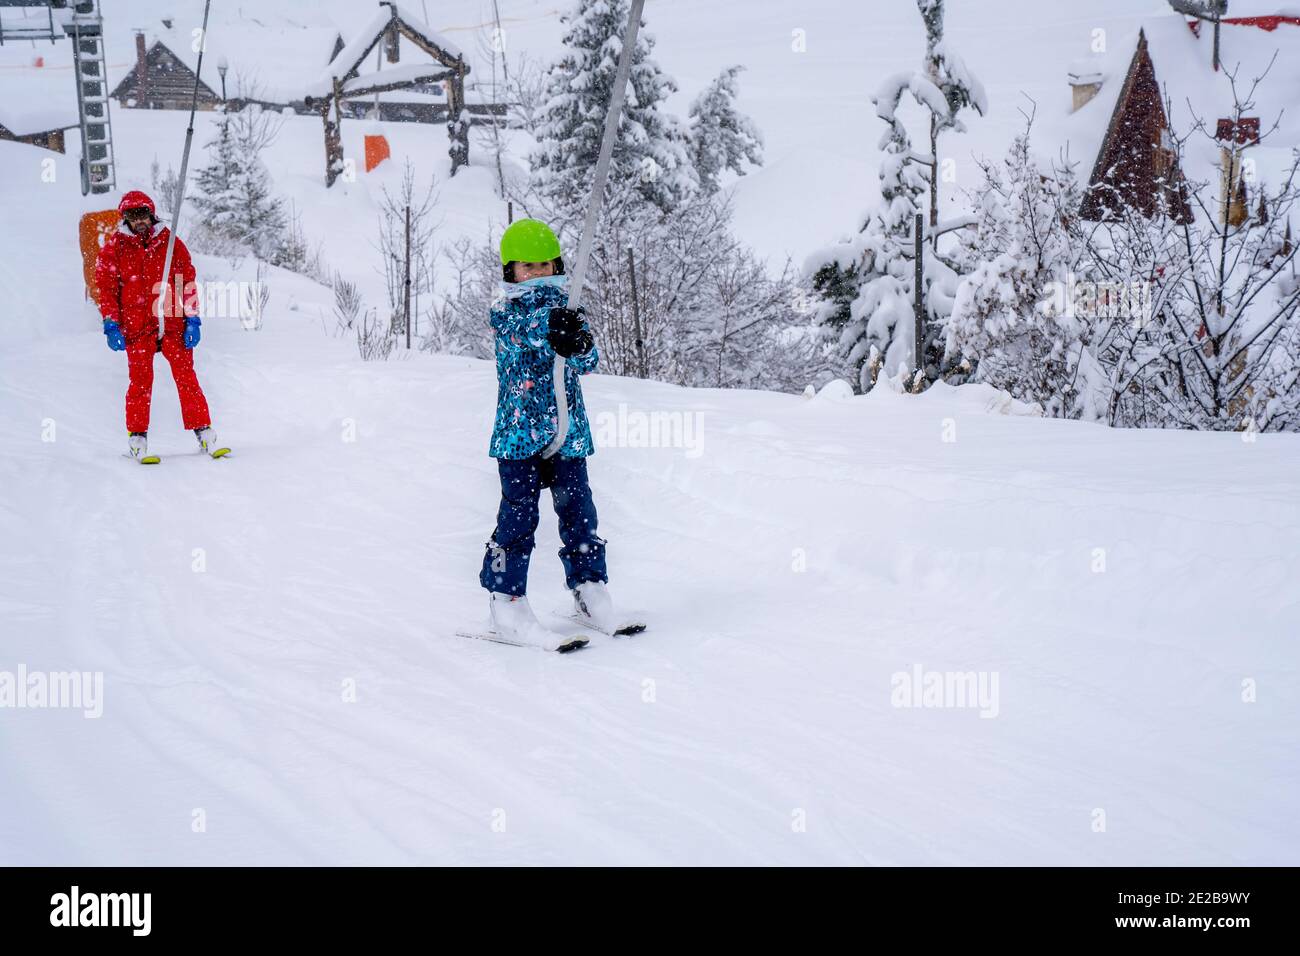 AURON, FRANCE-01.01.2021: Professional ski instructor and child lifting on the ski drag lift rope to the mountain during snowfall. Family and children active vacation concept. Blurred focus background Stock Photo